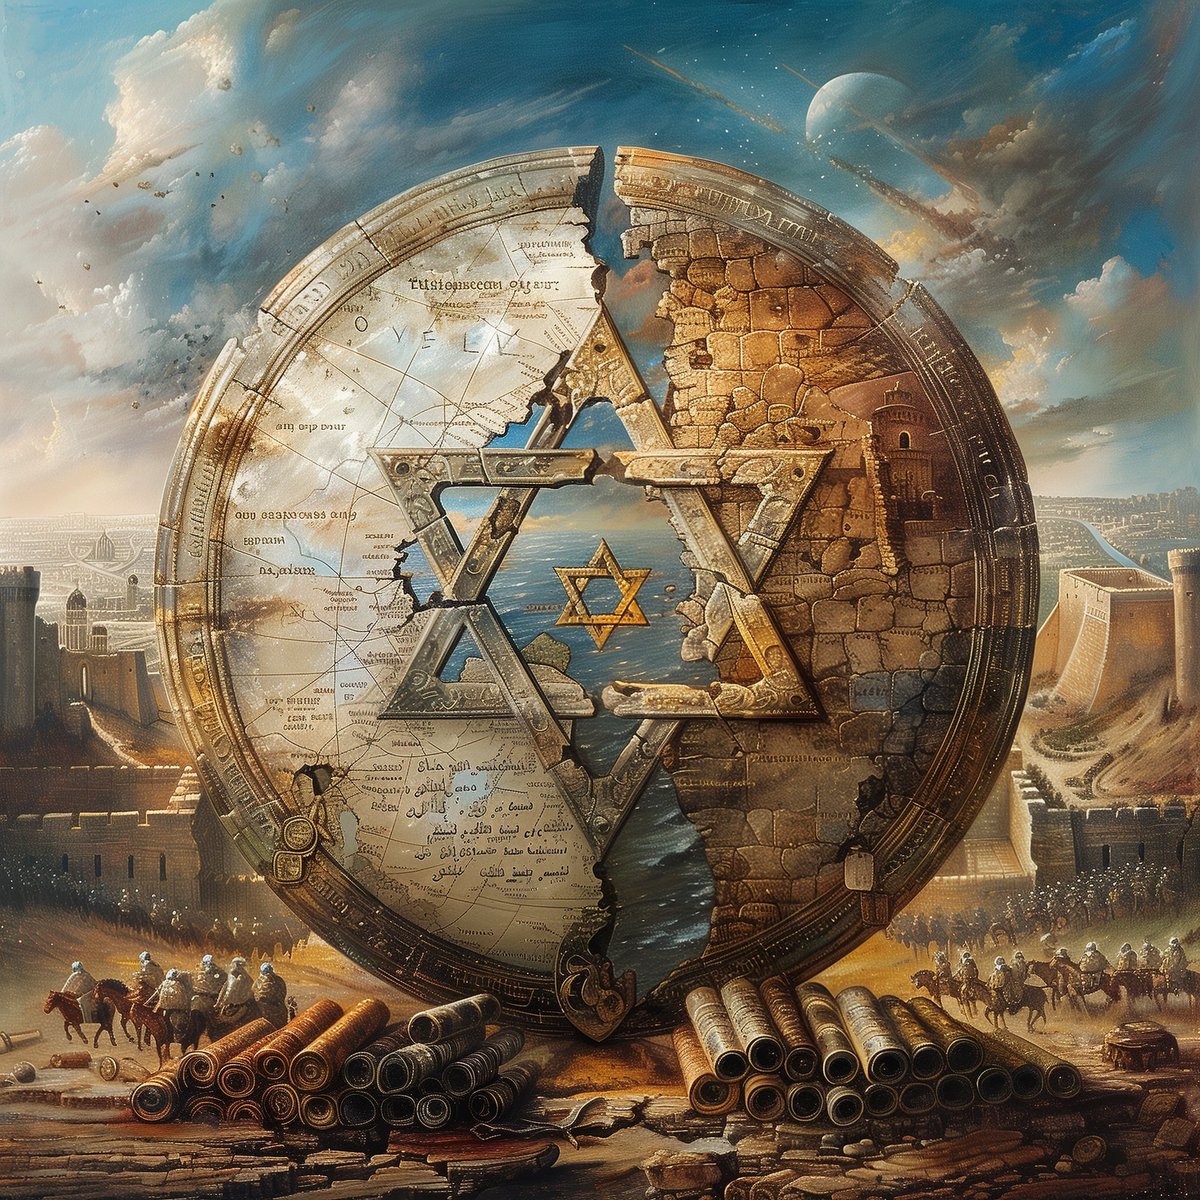 The Misused Legacy: How Antisemites Weaponize the 'European' Khazar Myth The story of the Khazar conversion to Judaism is a fascinating one, shrouded in historical debate and religious intrigue. However, this historical episode has been misused by antisemites to spread a